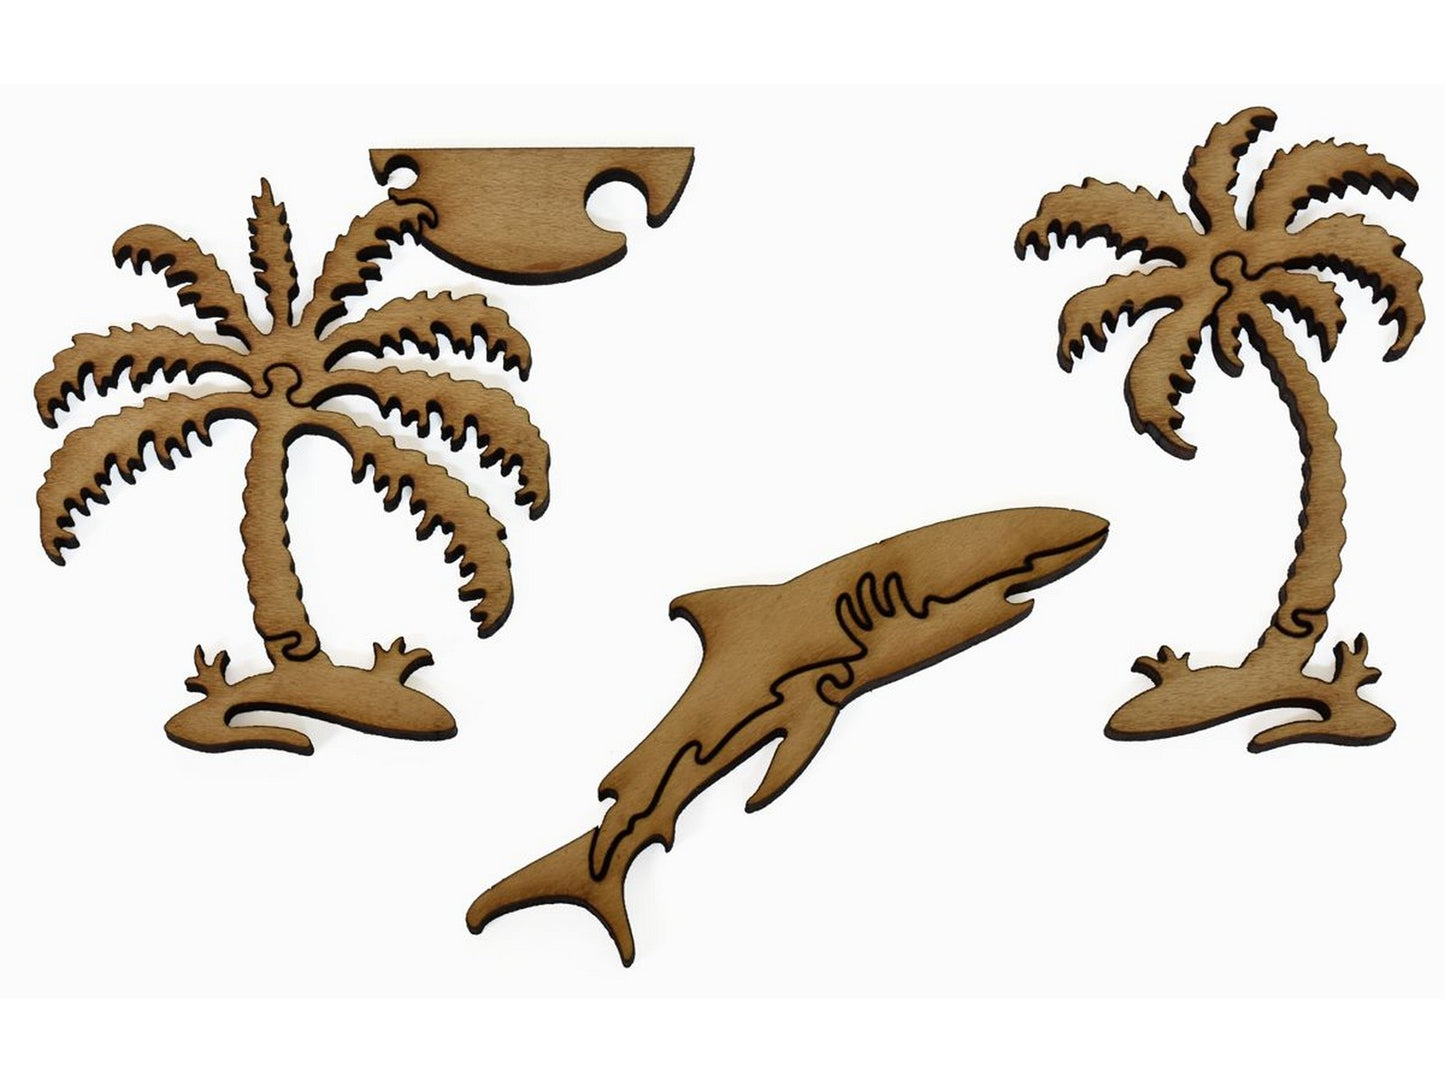 A closeup of pieces showing a shark and two palm trees with the sun.